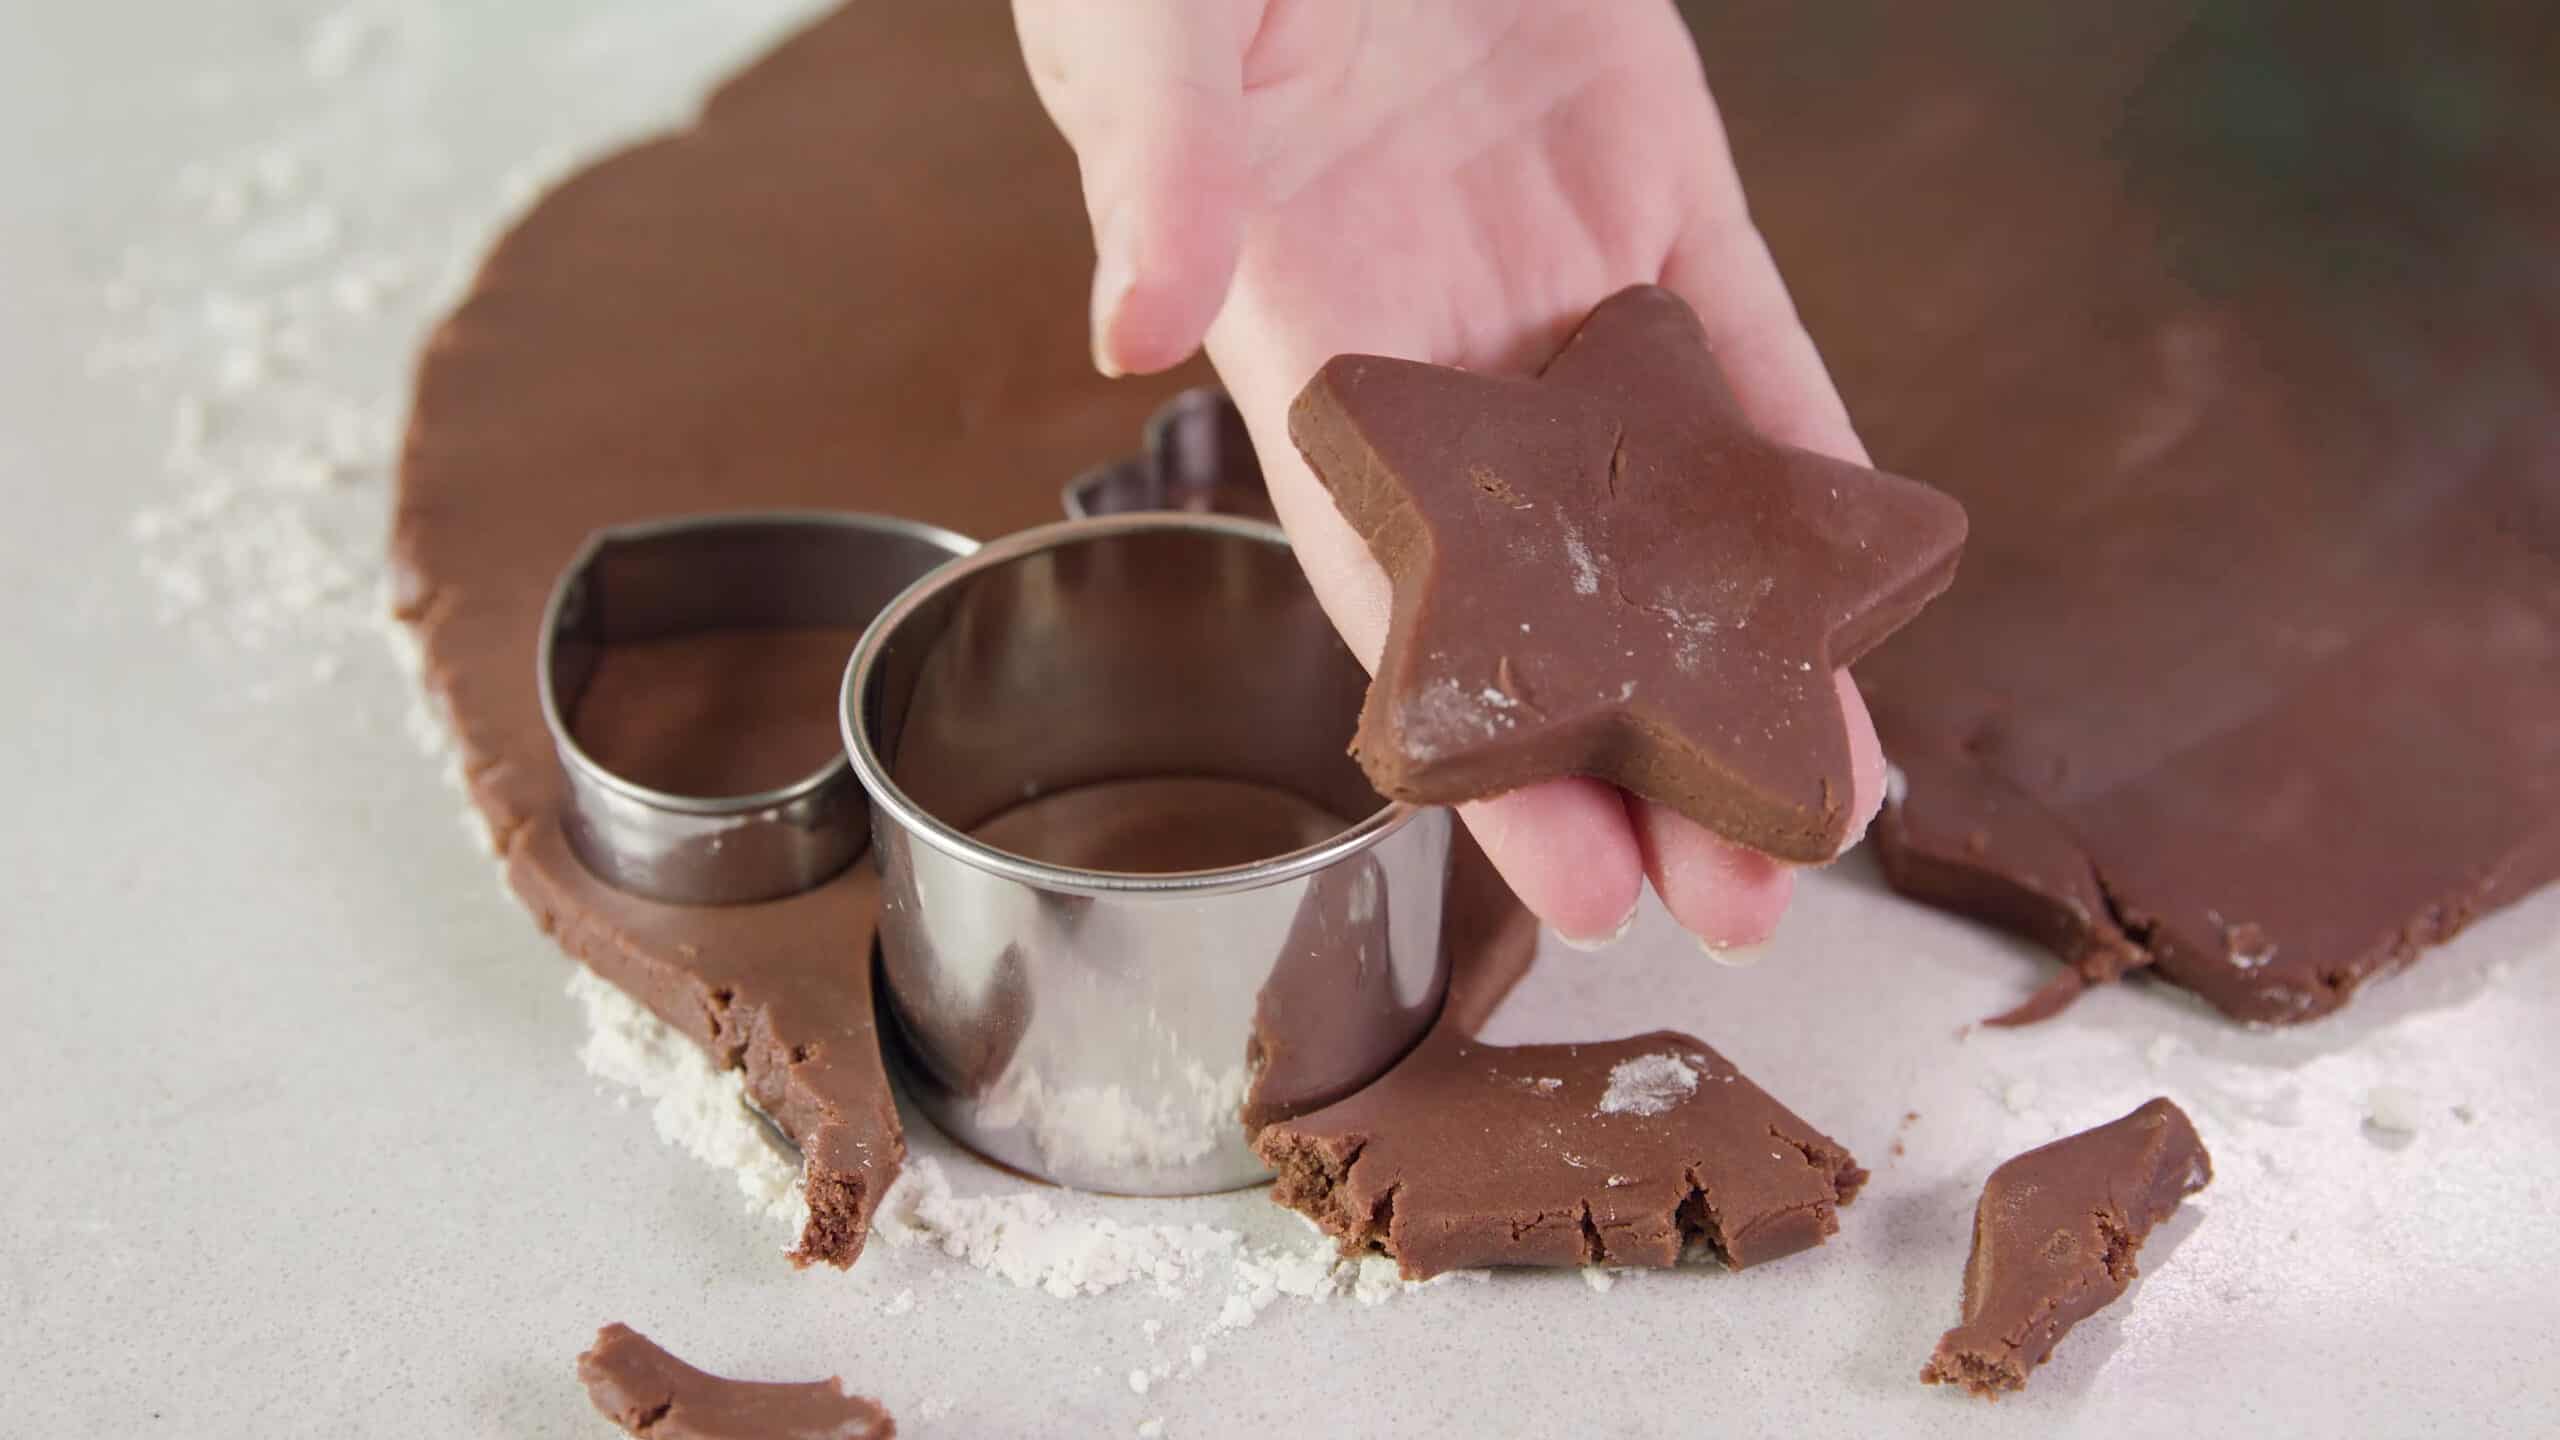 Angled view of a hand holding a star shaped chocolate sugar cookie after being punched from the flattened chilled dough using a metal cookie cutter, with the remaining flattened dough and other cookie cutters in the background.